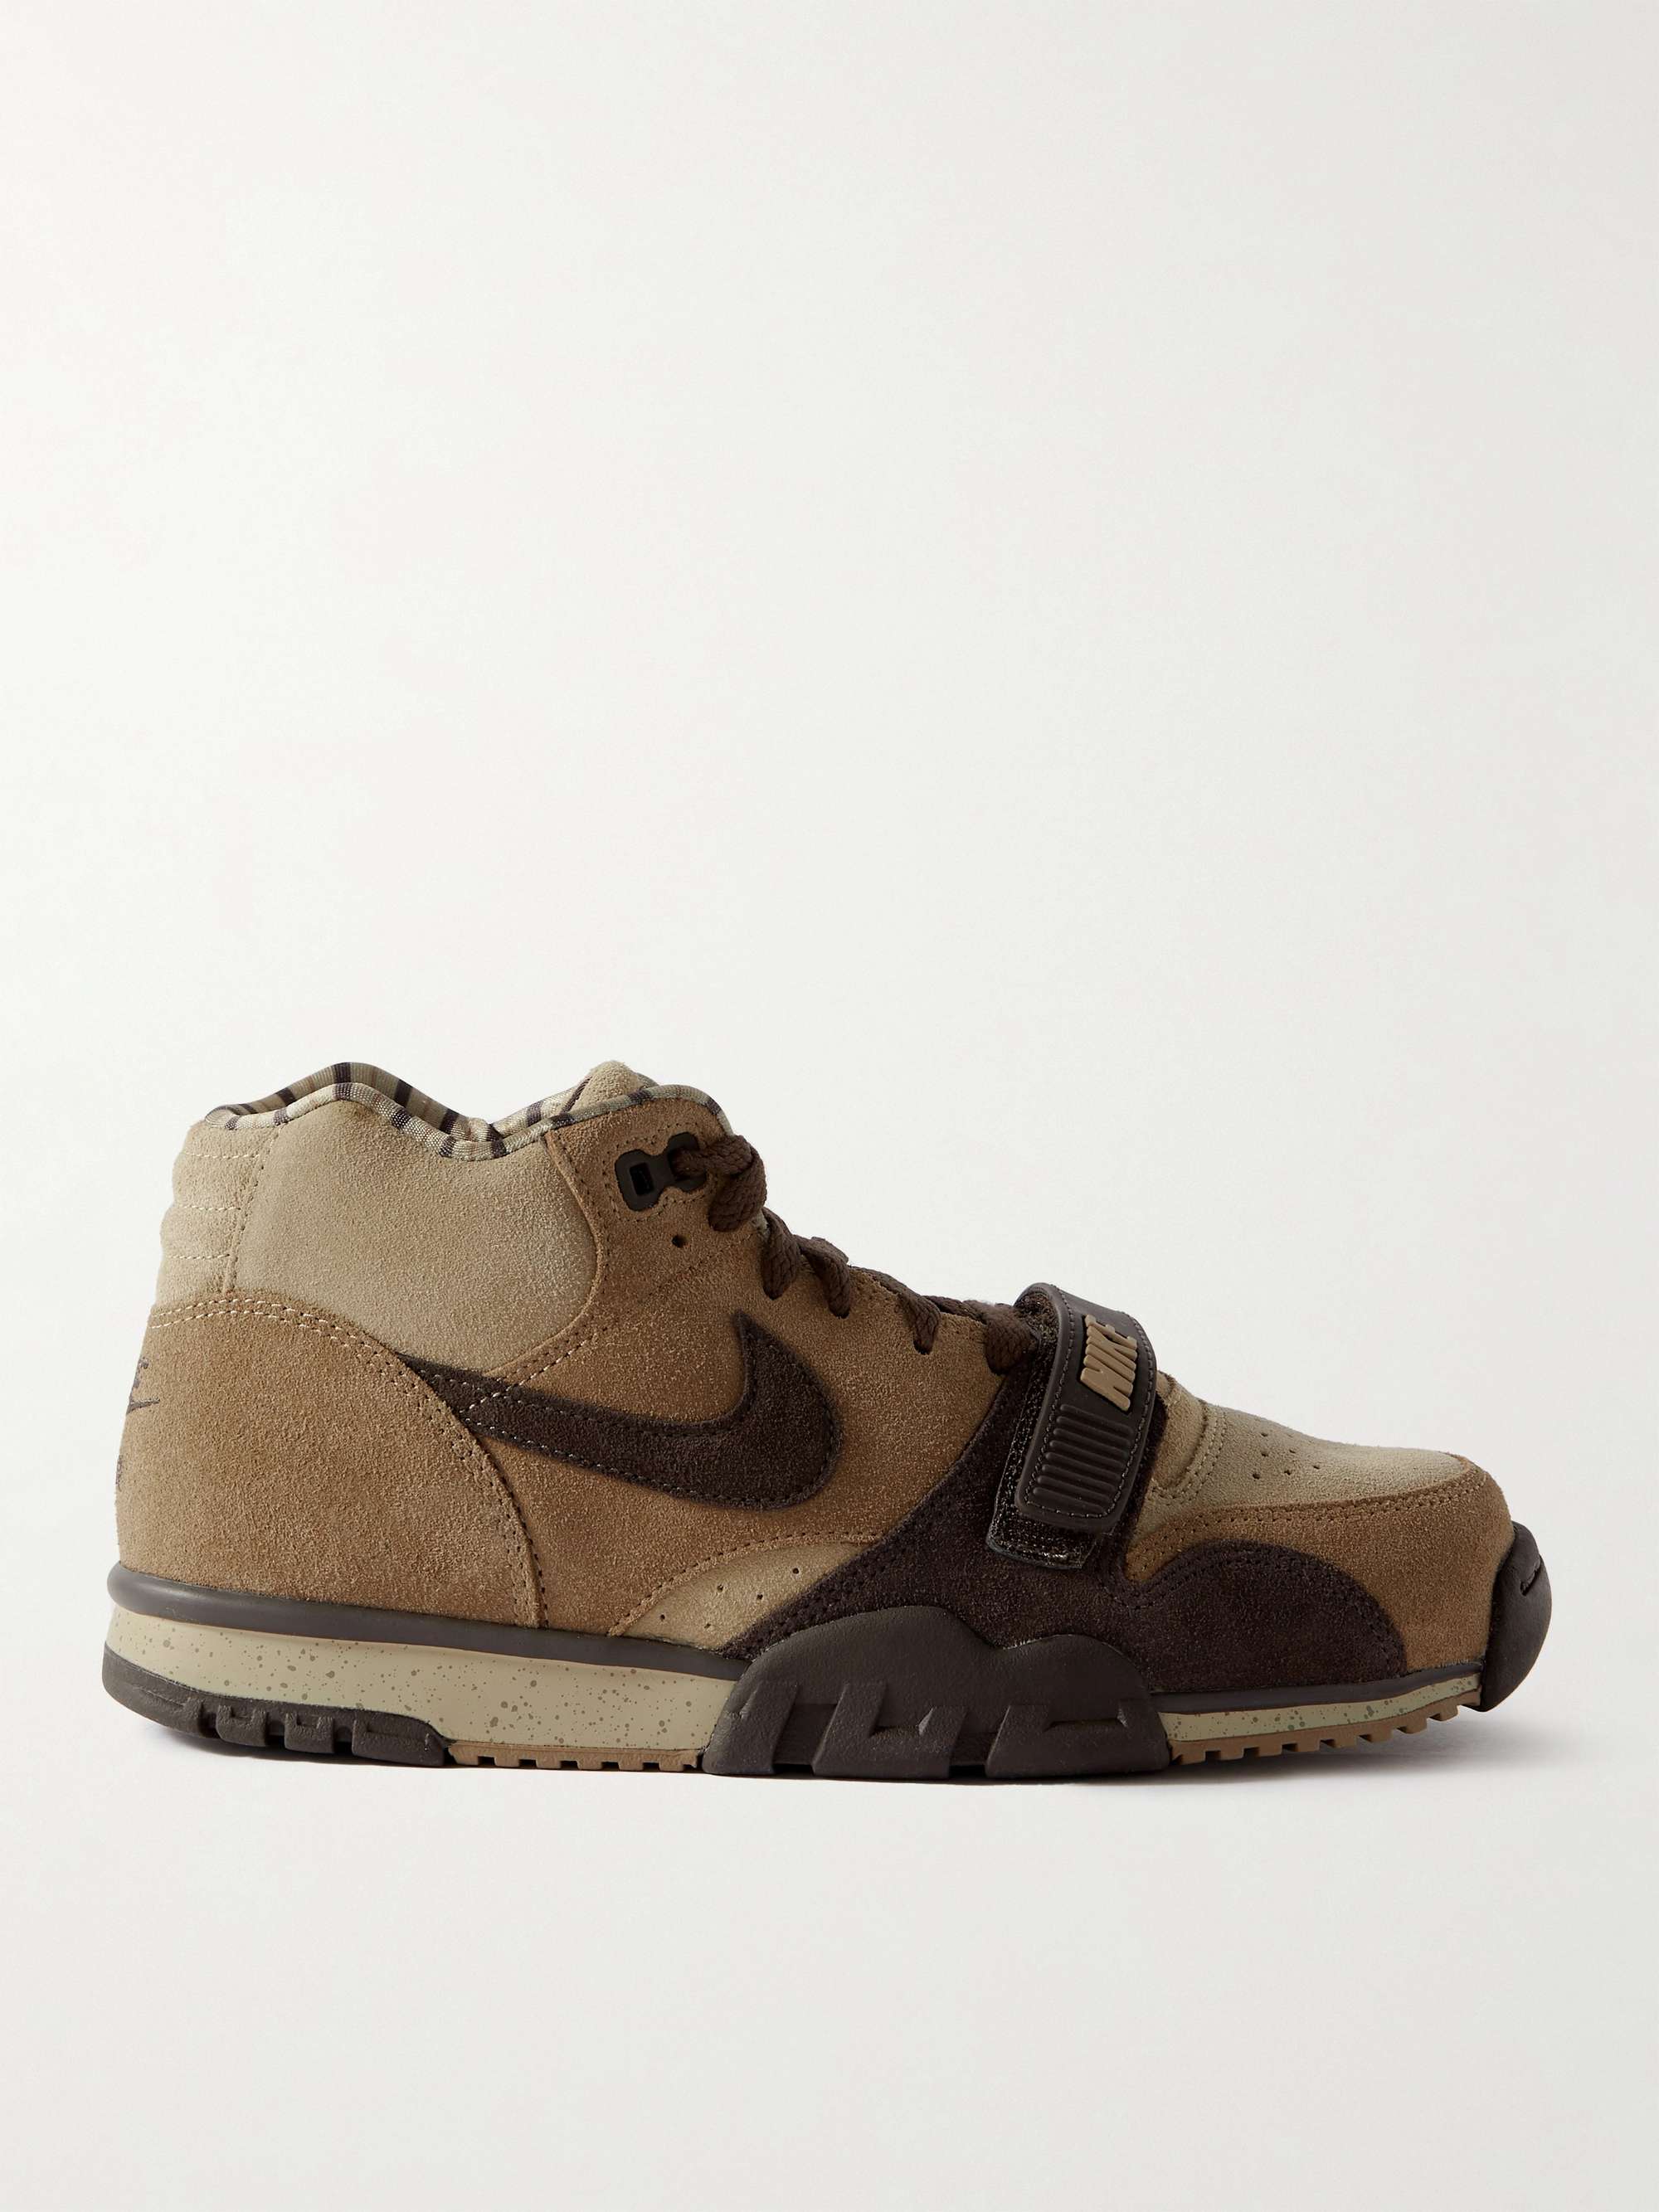 Brown Air Trainer 1 Leather-Trimmed Suede Sneakers | NIKE | MR PORTER